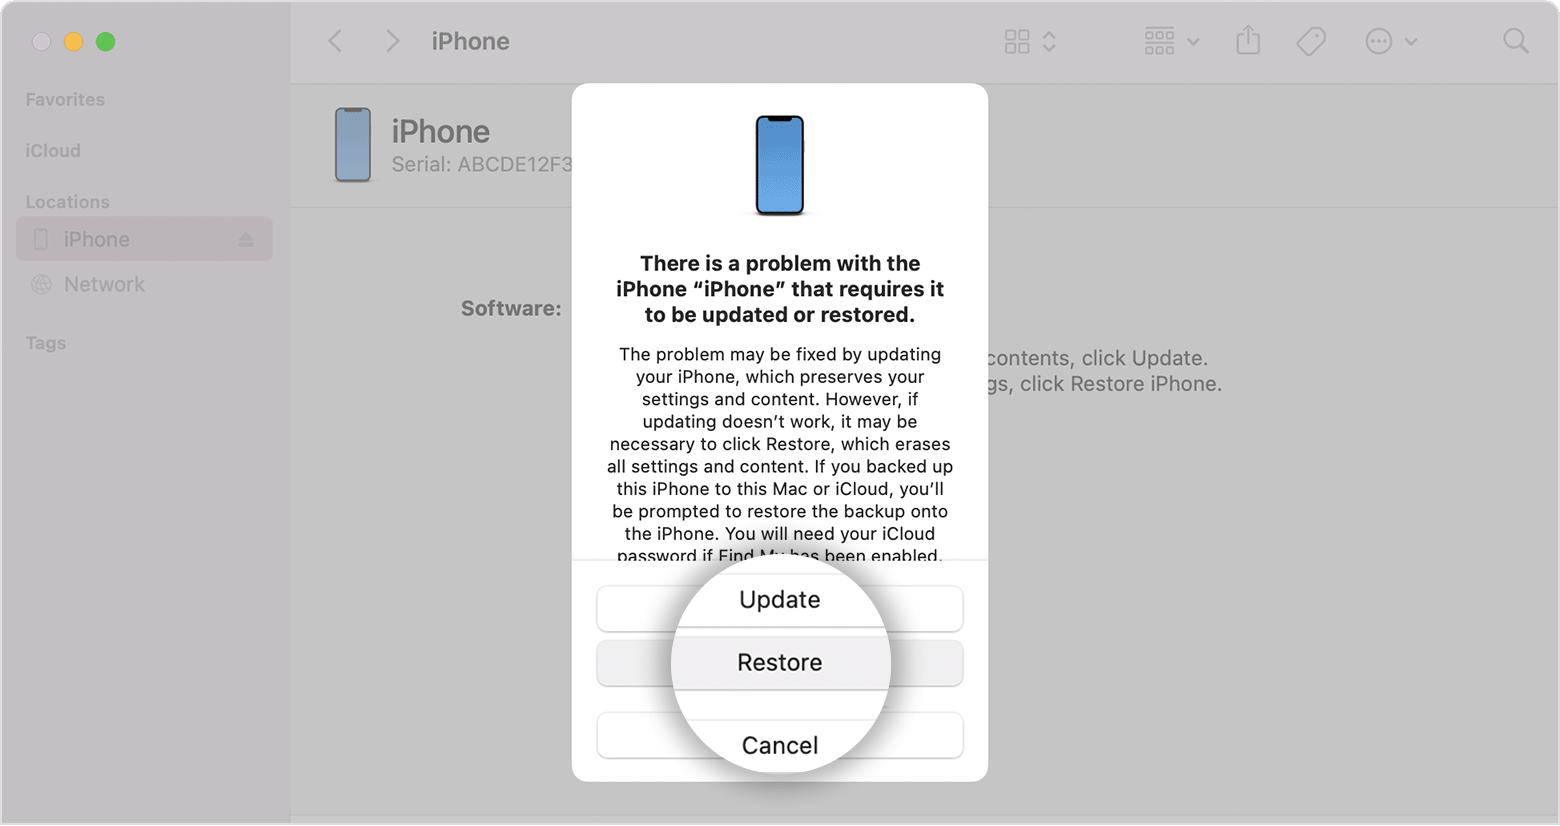 There is a problem with the iPhone that requires it to be updated or restored